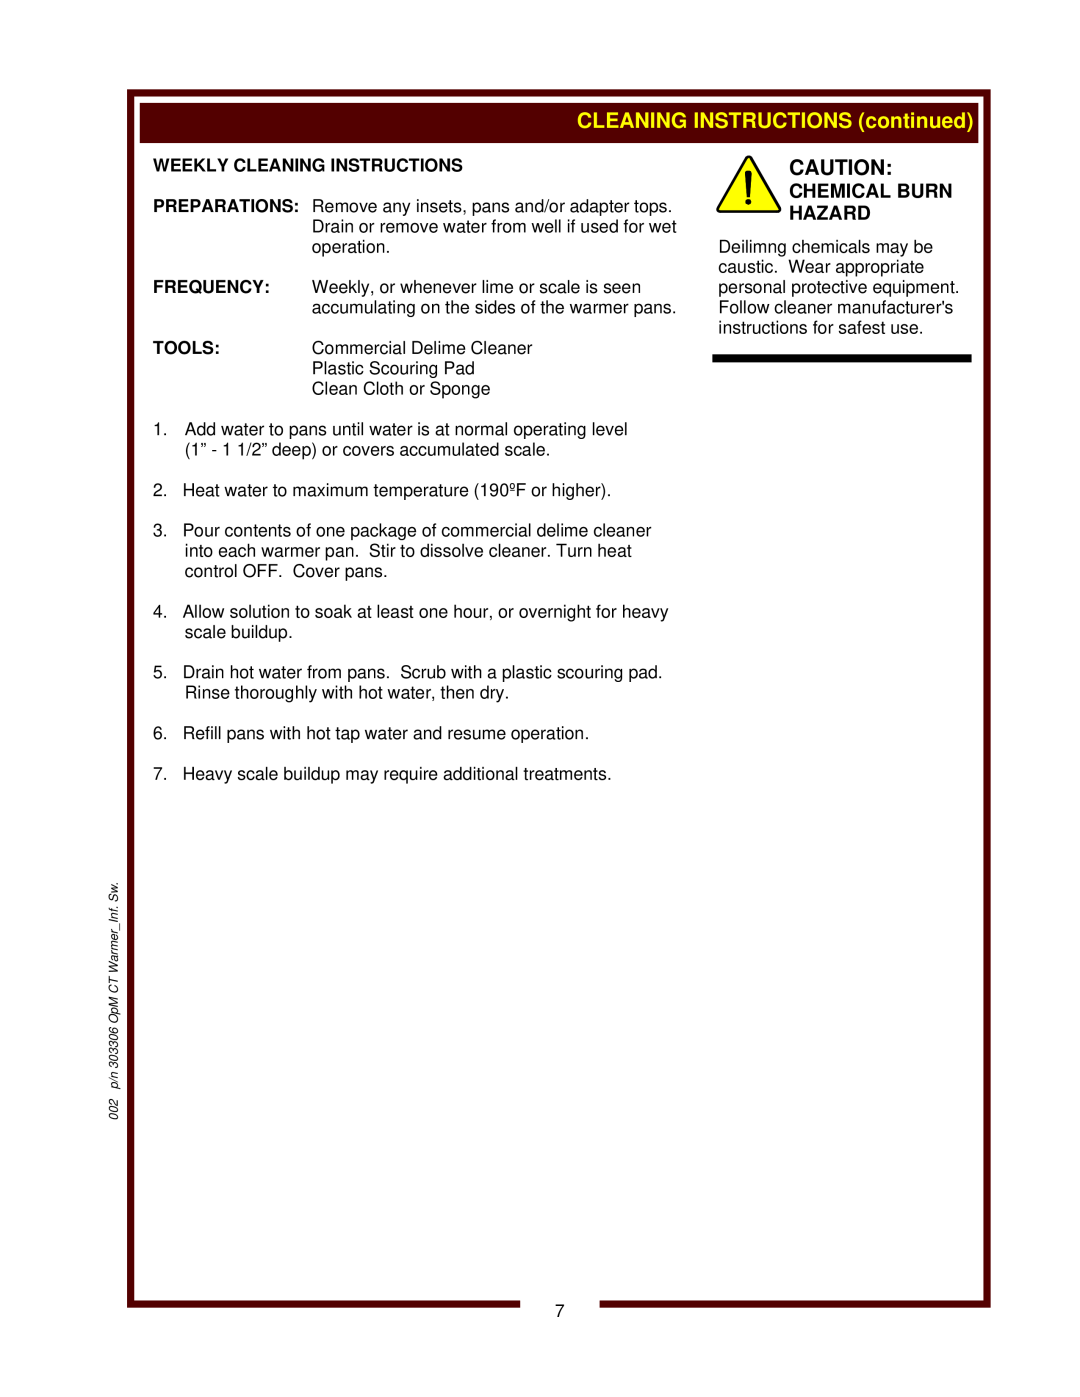 Wells SW-10 operation manual Chemical Burn Hazard, Weekly Cleaning Instructions 